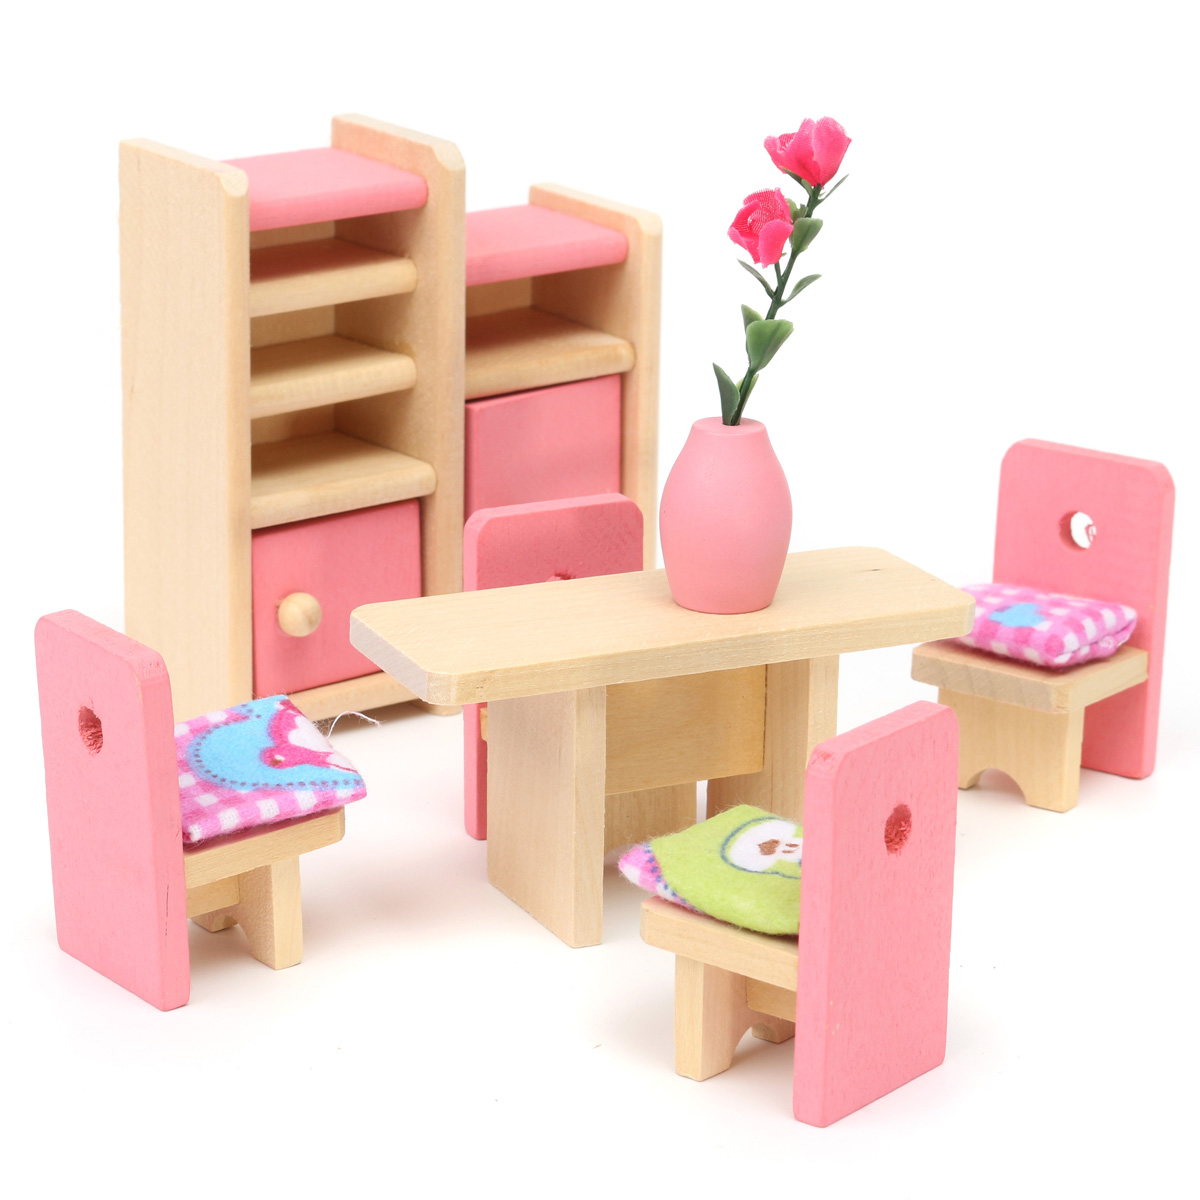 Wooden Furniture Room Set Dolls House Family Miniature For Kids